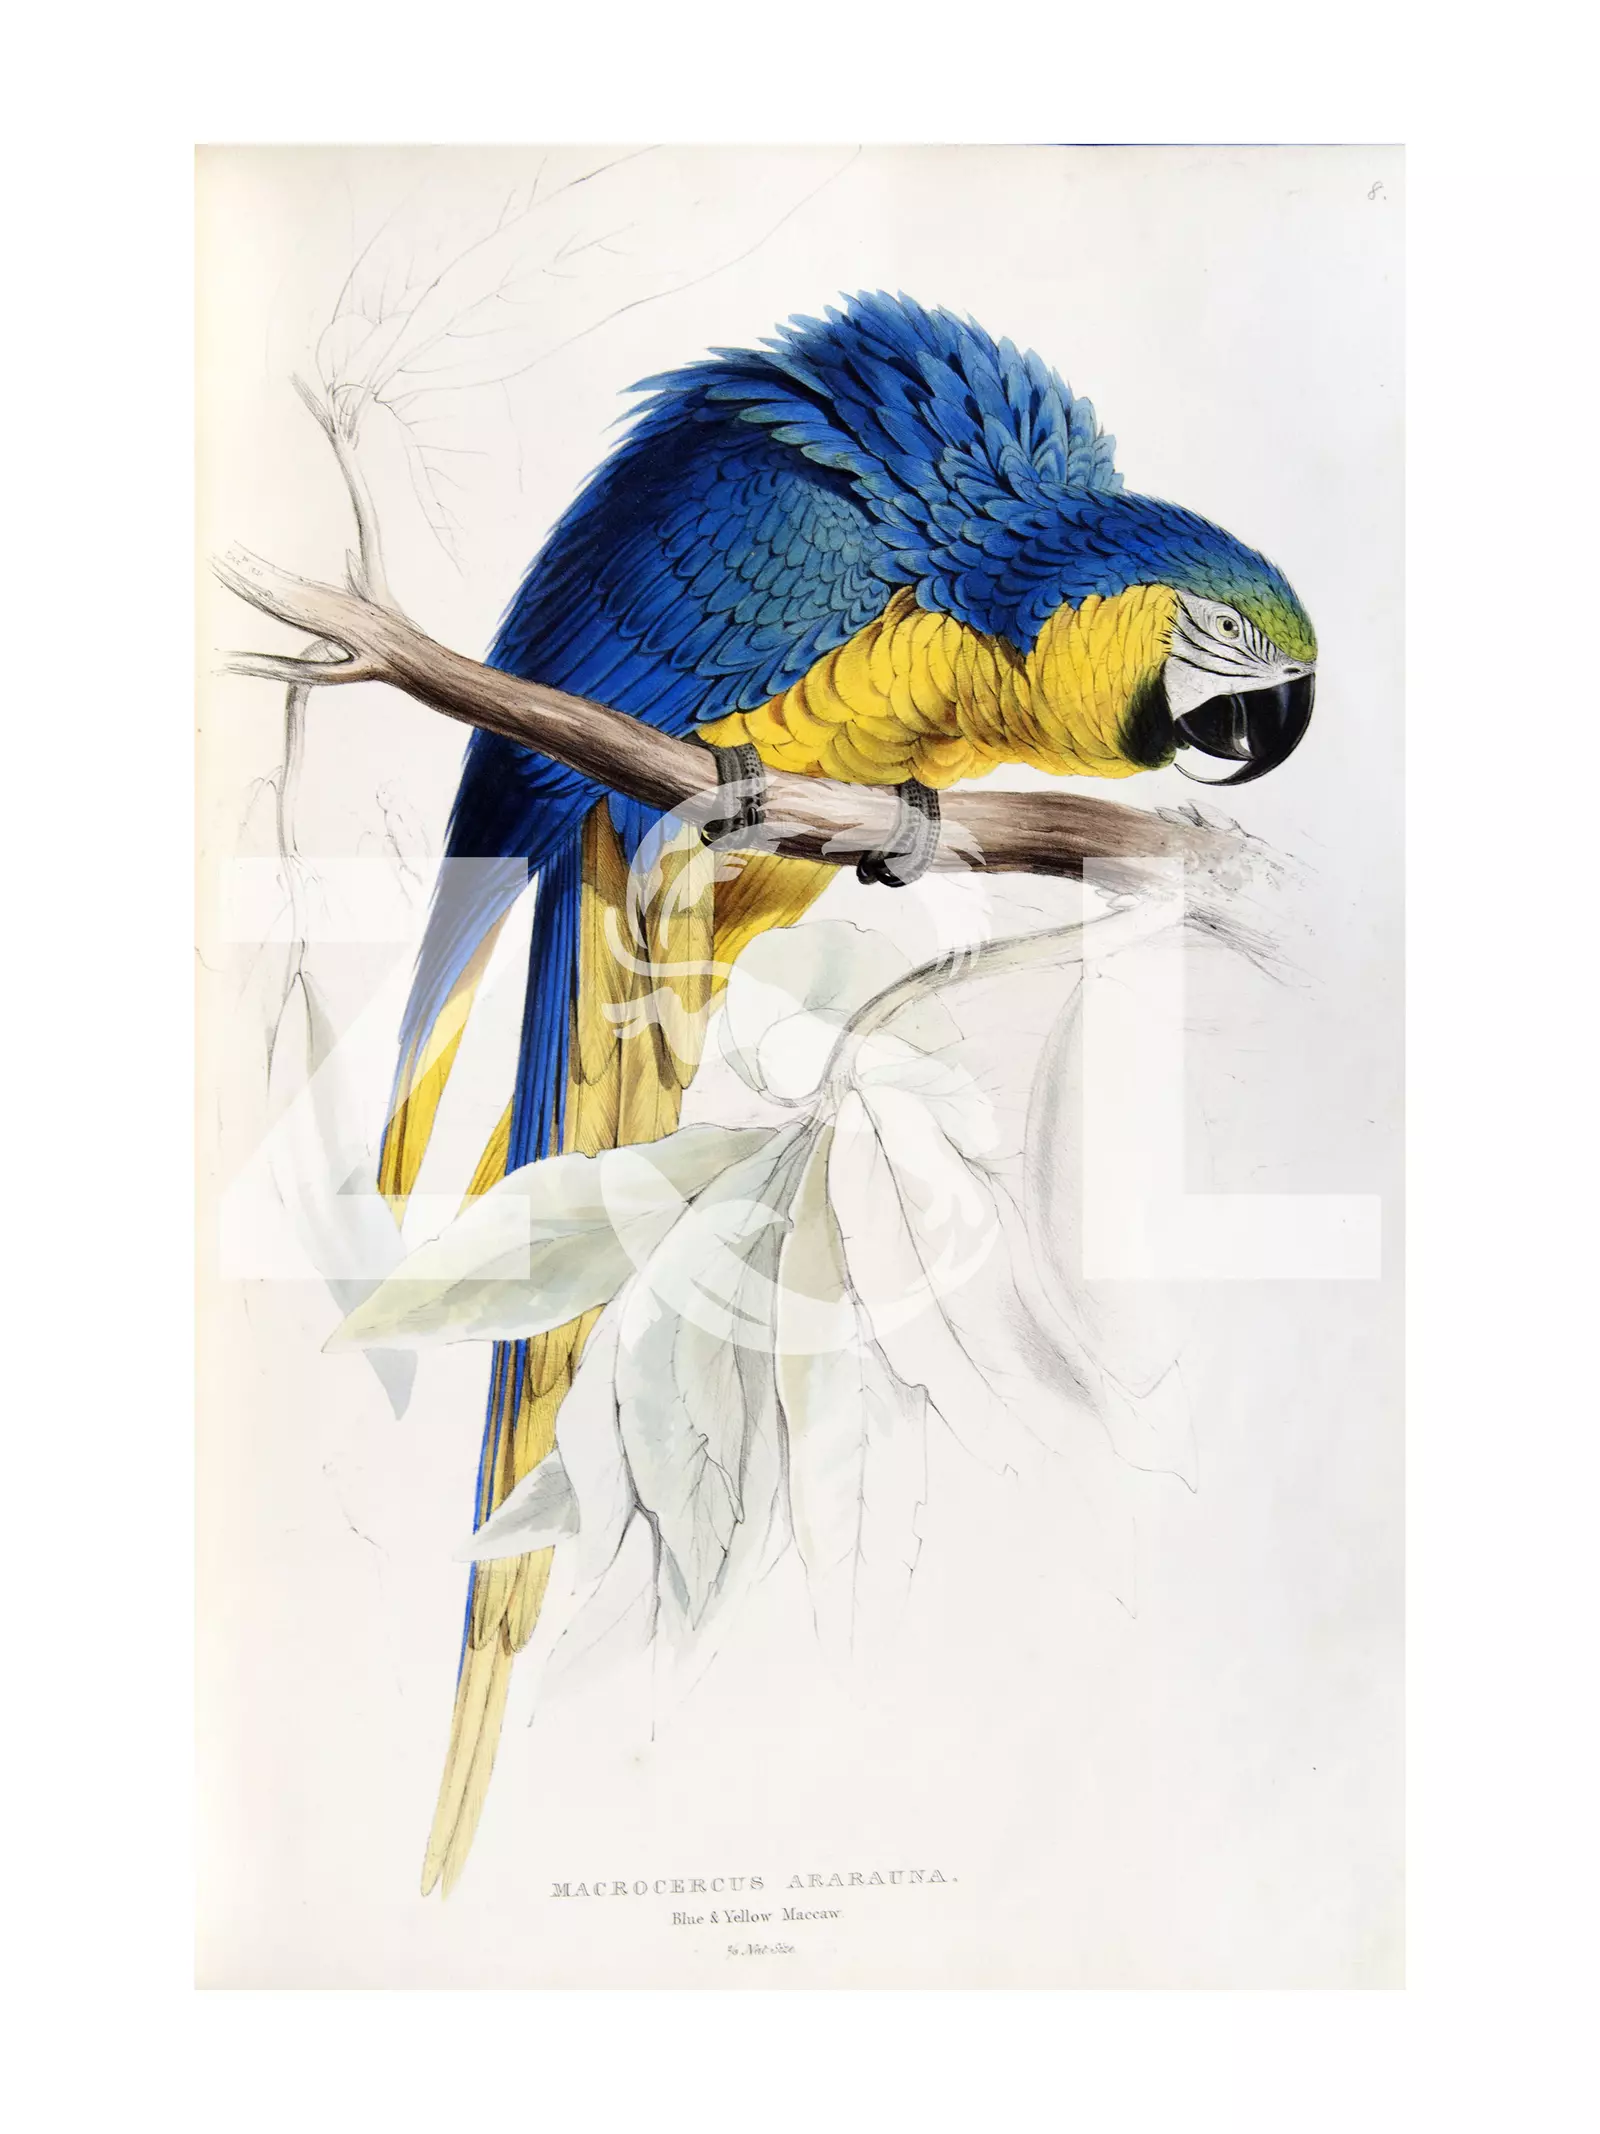 Lithograph of blue and yellow macaw by Edward Lear in 'Illustrations of the family of Psittacidae, or parrots,...', 1832.